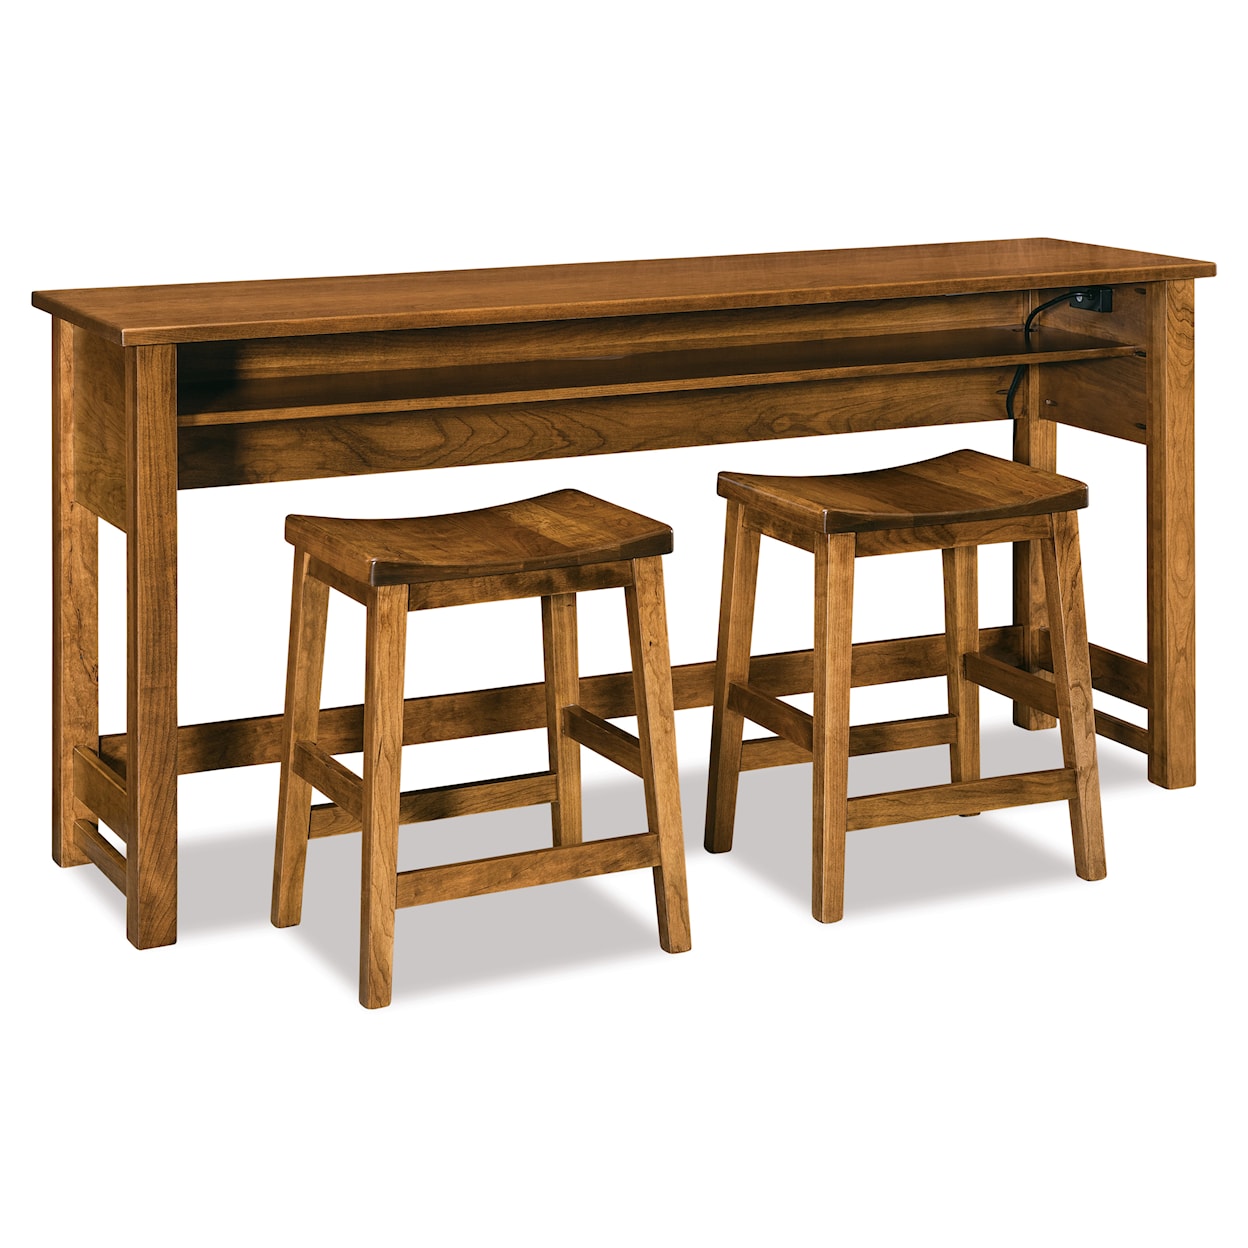 Archbold Furniture Bob Timberlake Counter-Height Wall Table with Stools